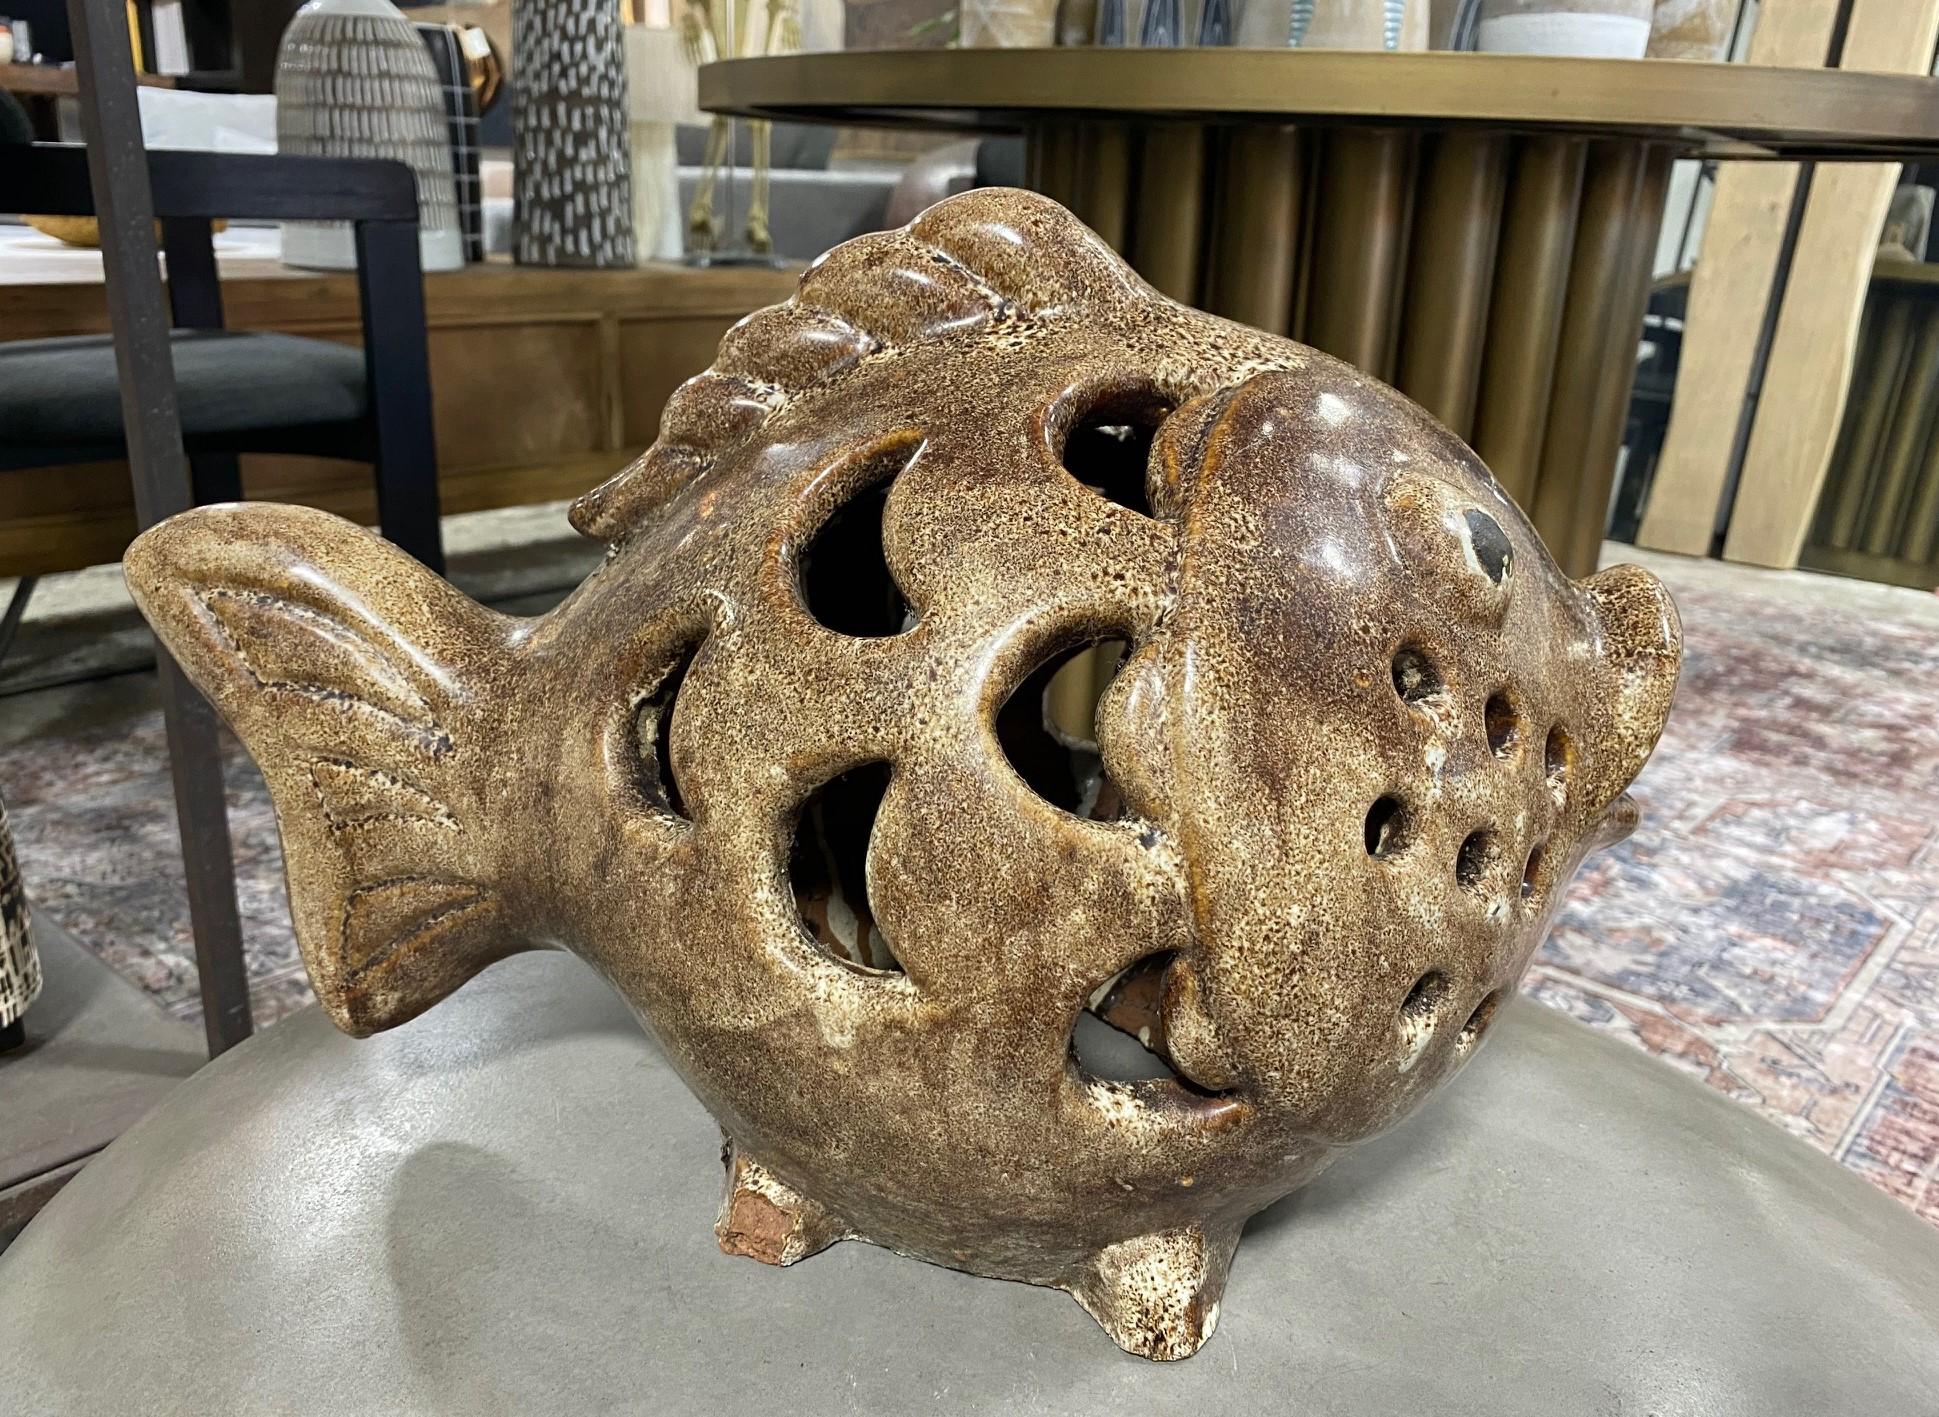 A rather curious and wonderful work - large, heavy ceramic fish sculpture - perhaps a pufferfish. 

The rich glaze and colors are fantastic. We have not seen another piece quite like it.

Would make for a fantastic accent piece in about any